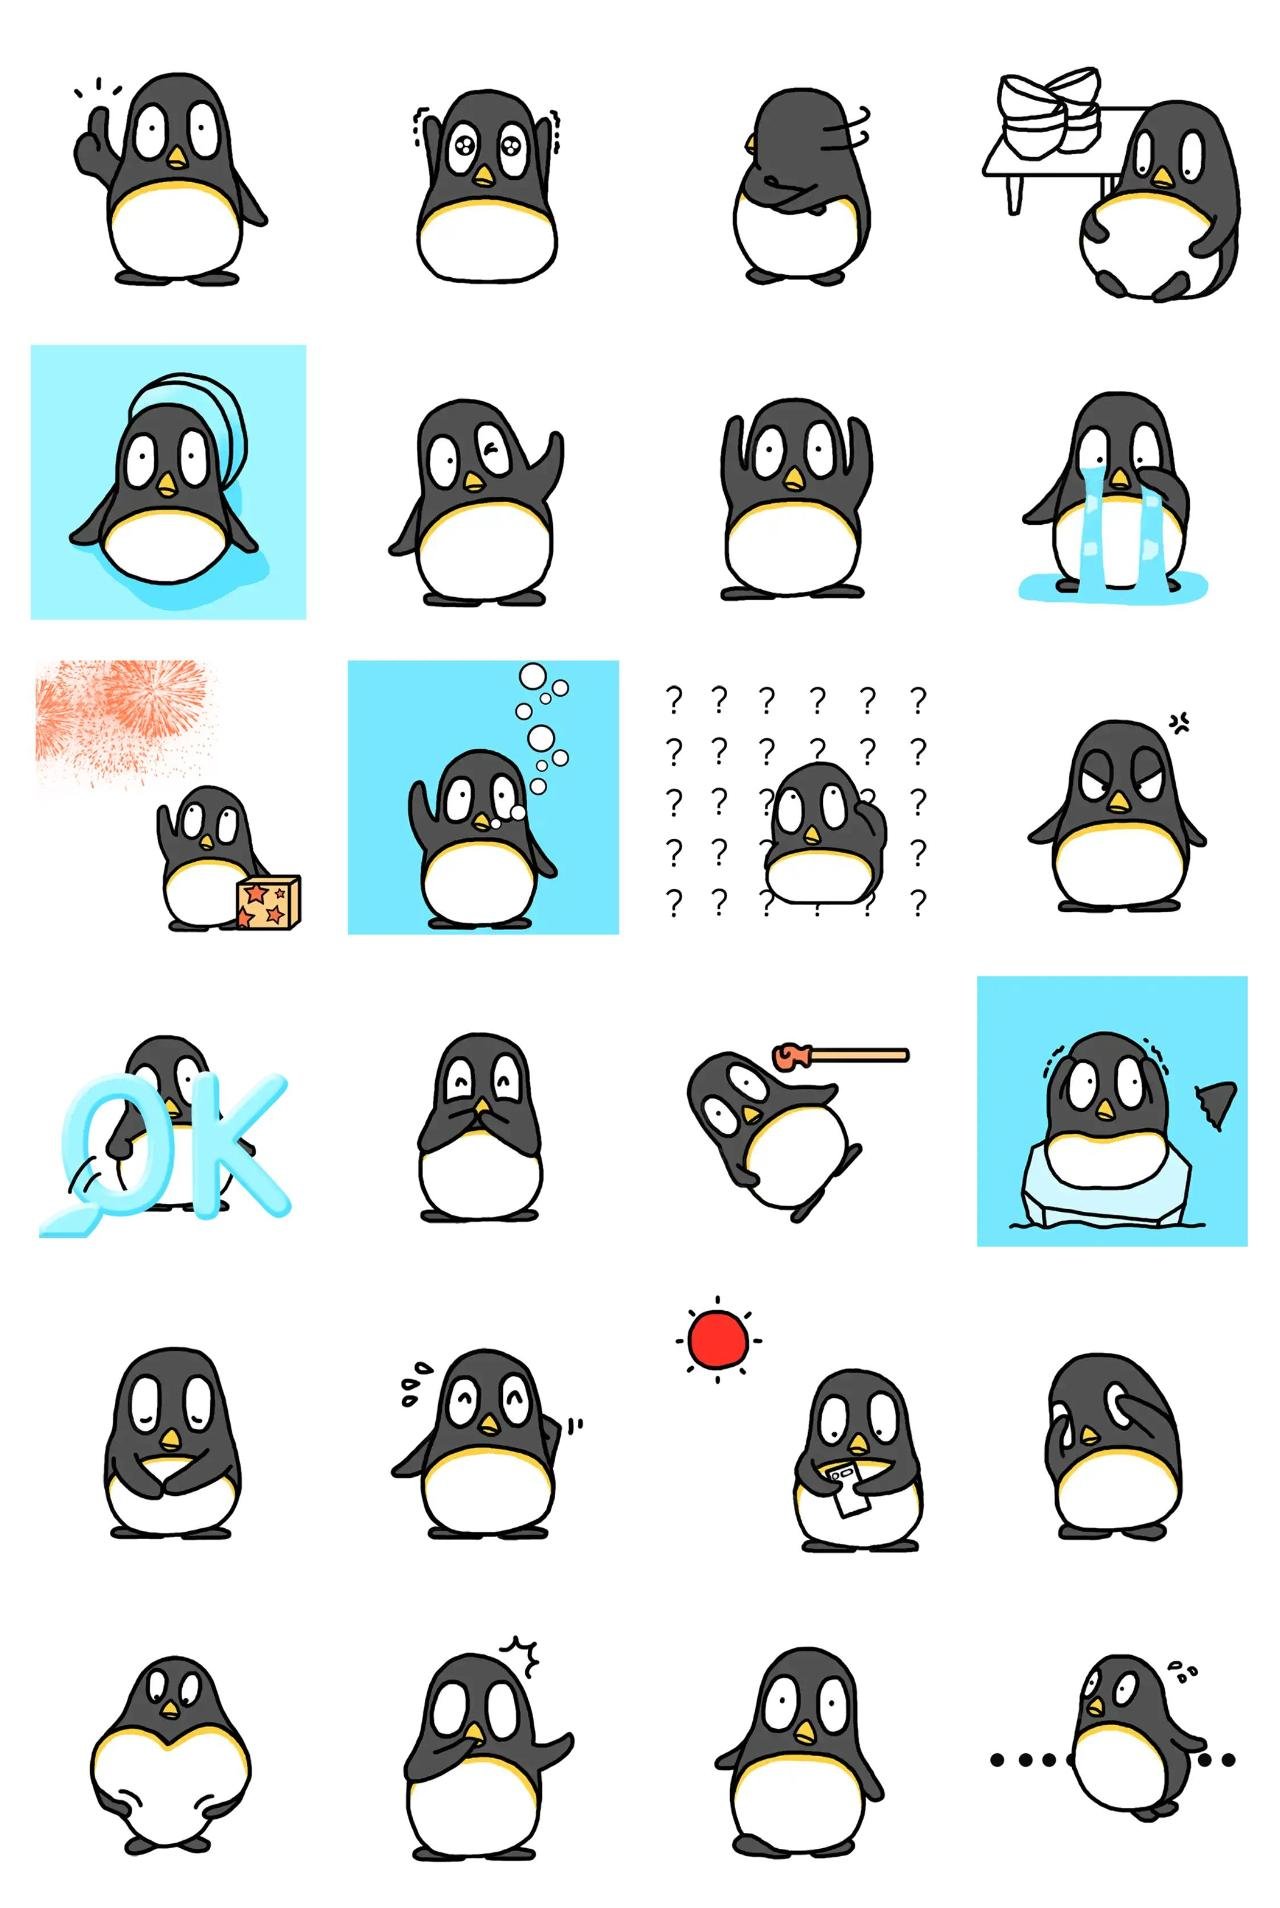 Eyejjang Animals,Animals sticker pack for Whatsapp, Telegram, Signal, and others chatting and message apps